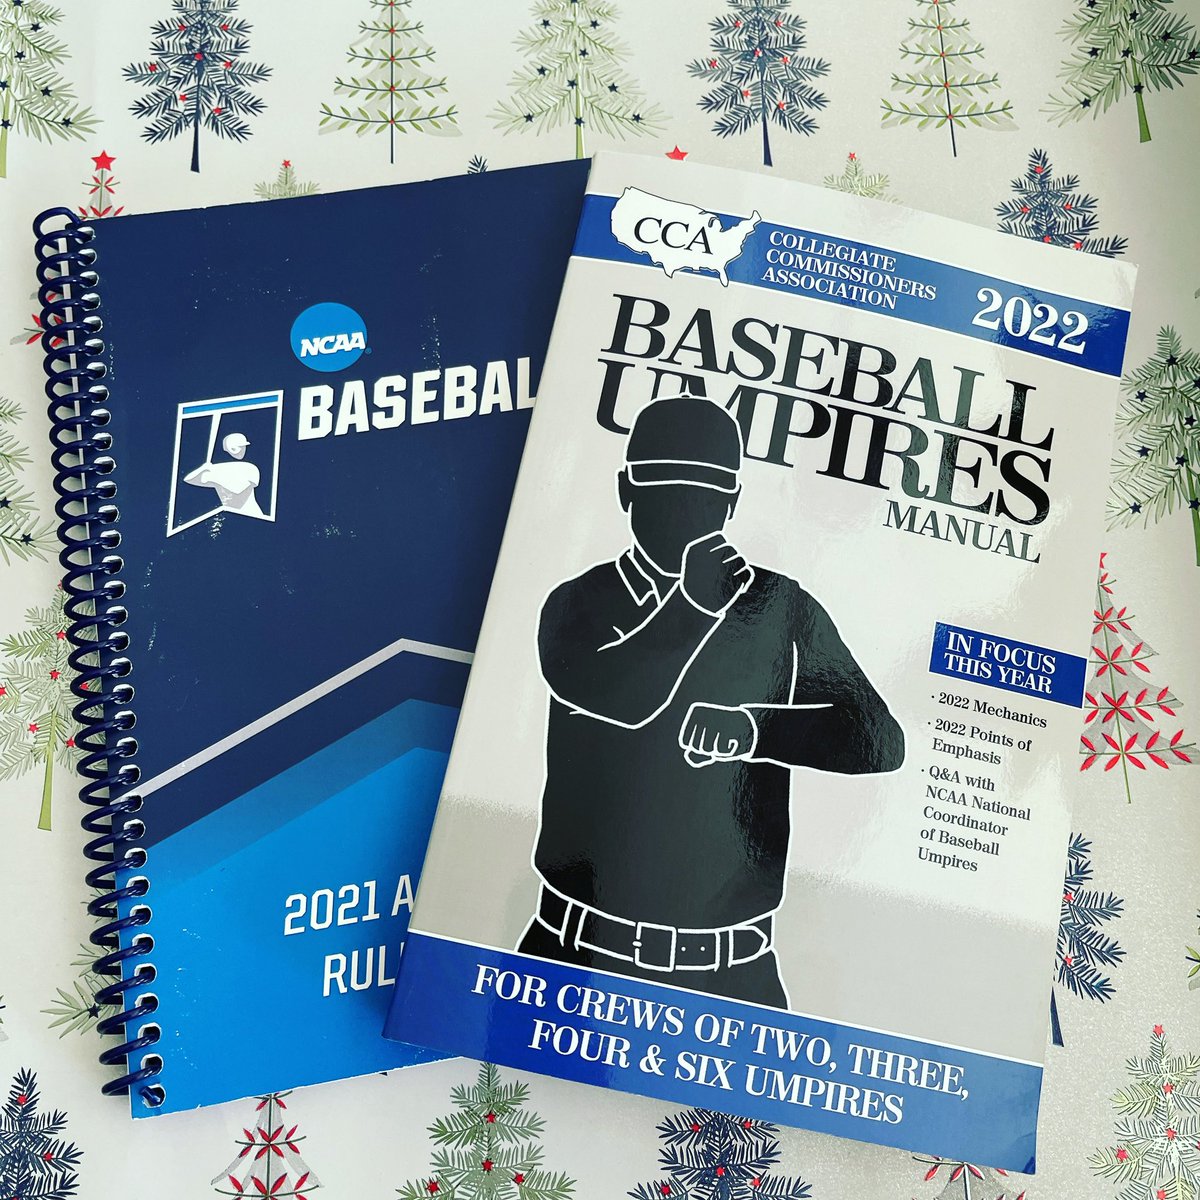 🎄🎅⚾️🎁Christmas came early ! 🎄⚾️🎅🎁@NCAACWS @NCAA @ArbiterSports #officialsdepot